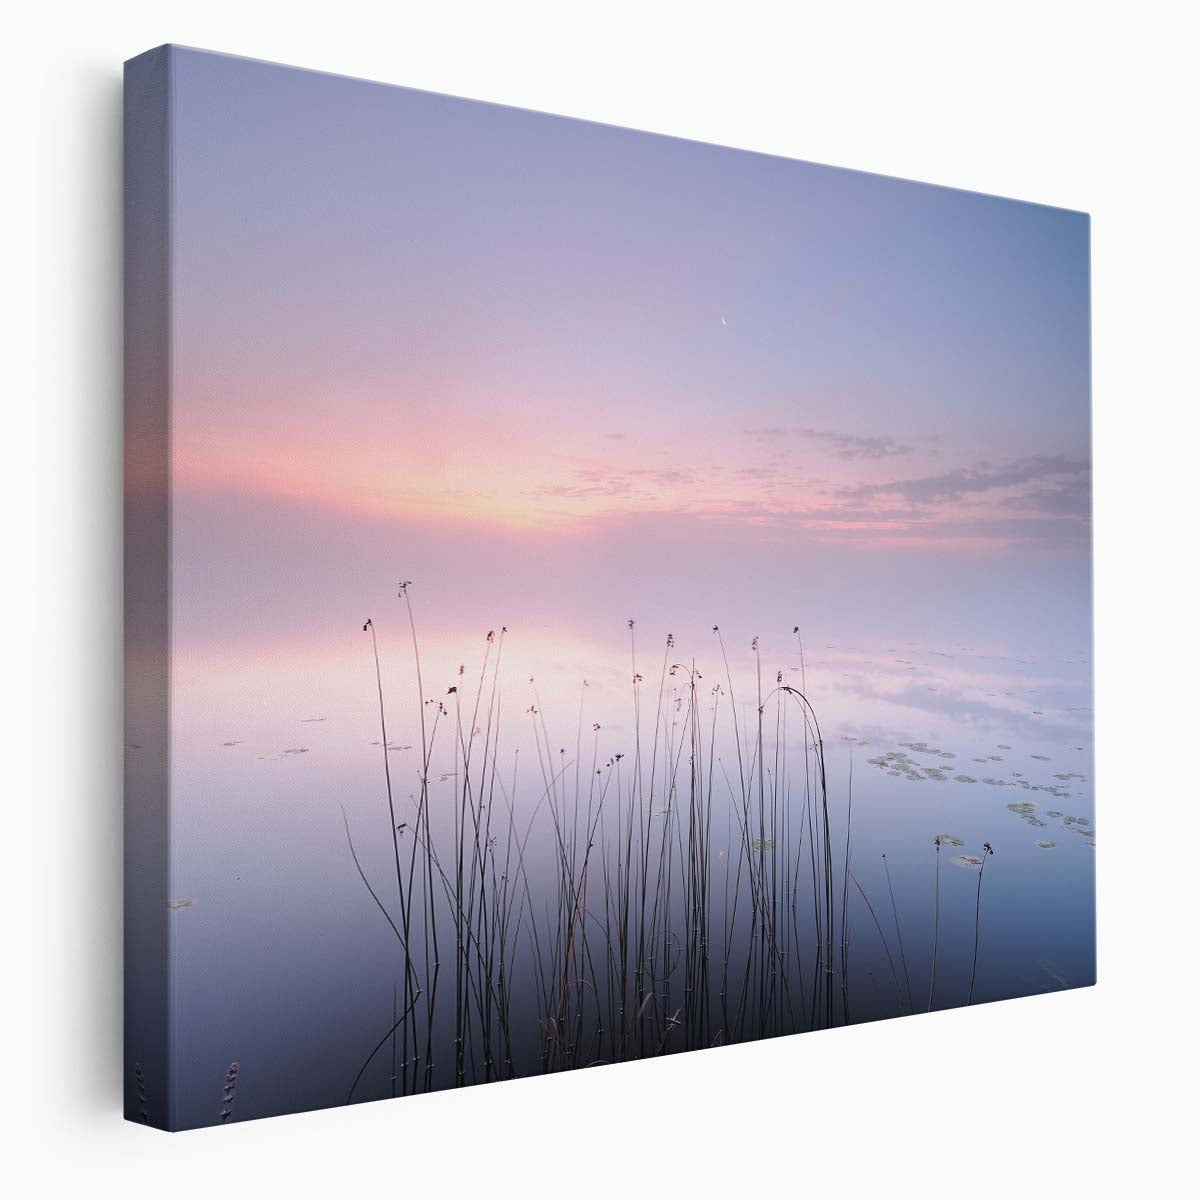 Serene Swedish Lake at Dusk Pastel Wall Art by Luxuriance Designs. Made in USA.